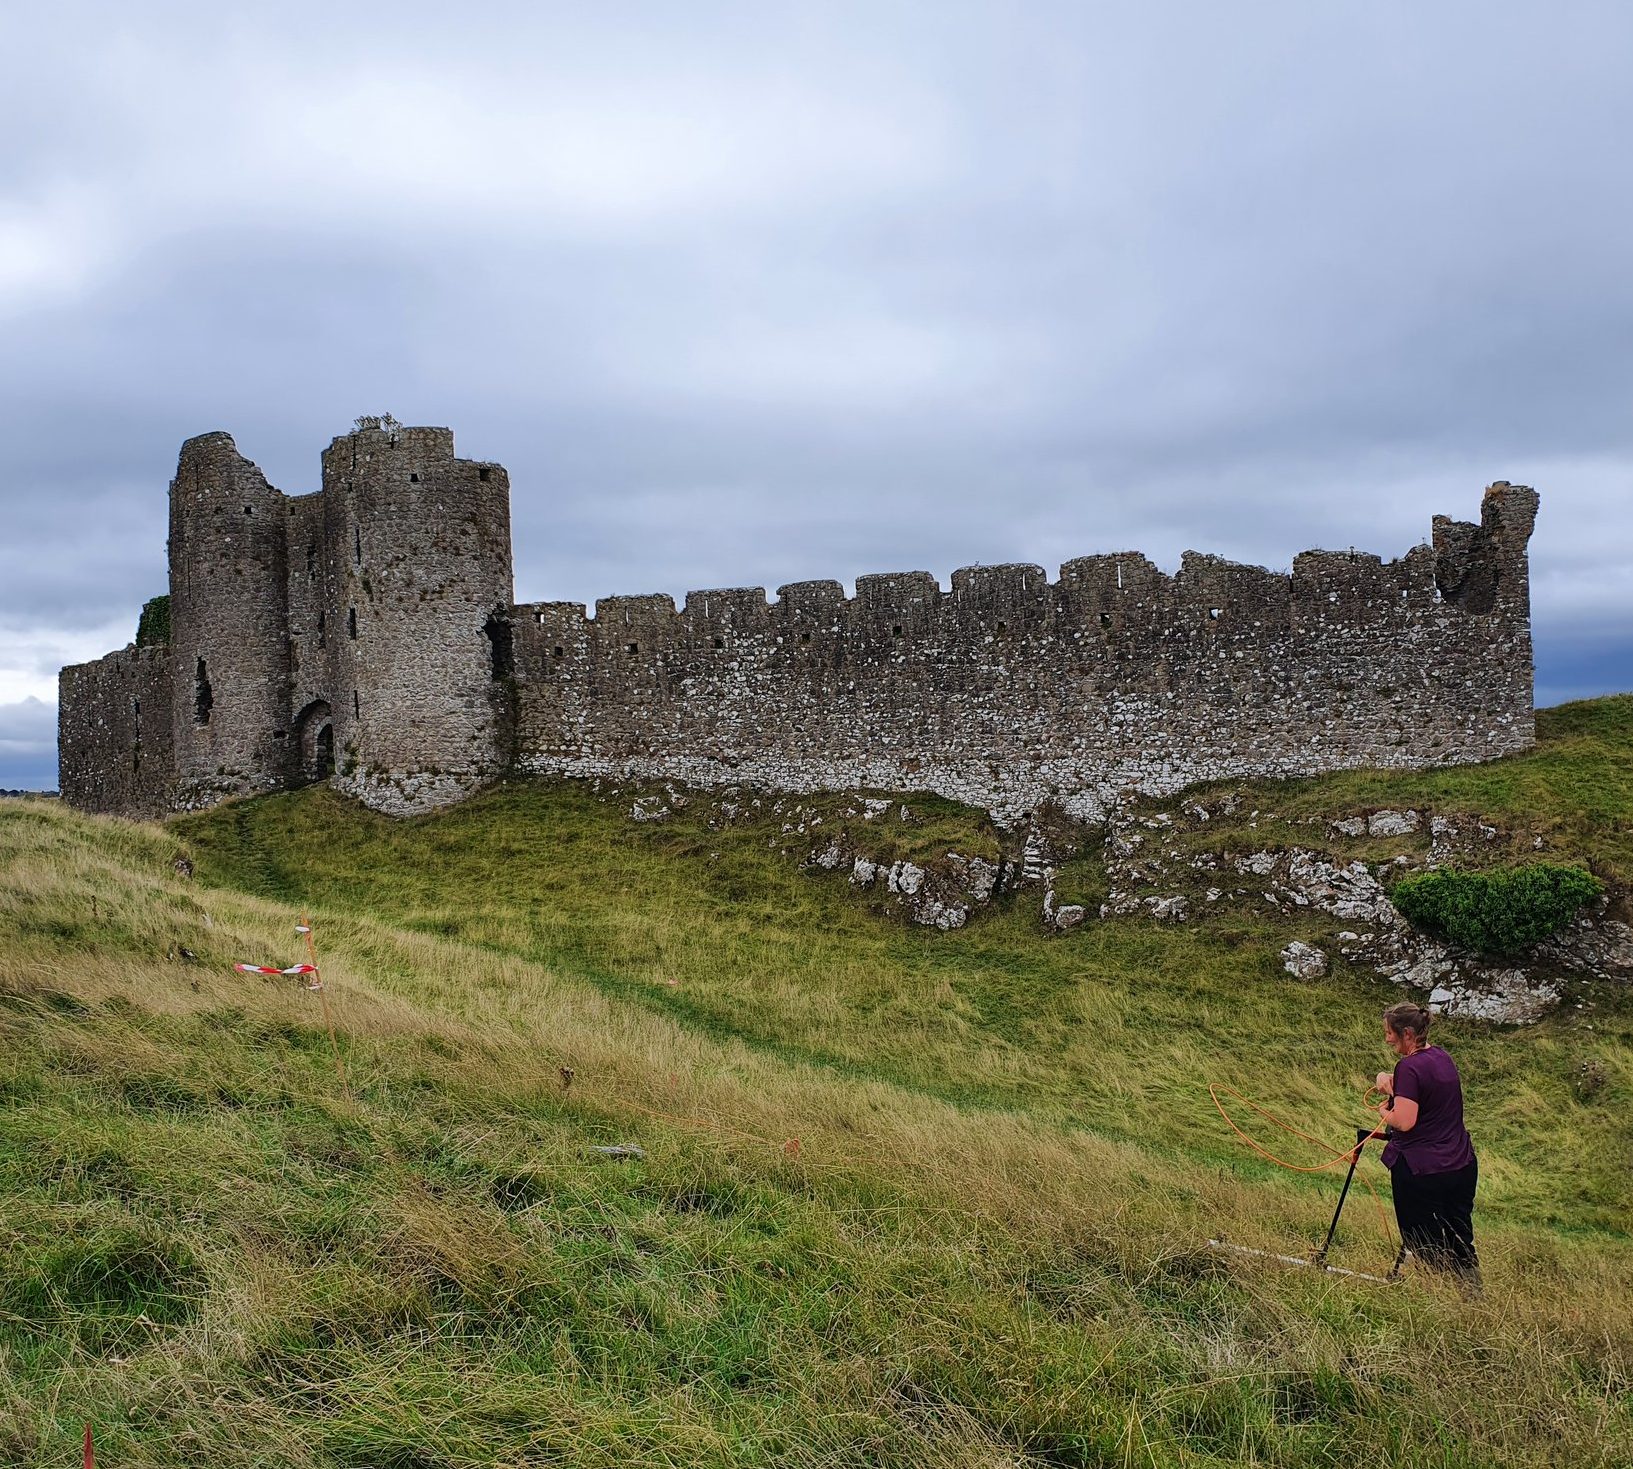 What lies beneath? Recent research at Castle Roche, County Louth